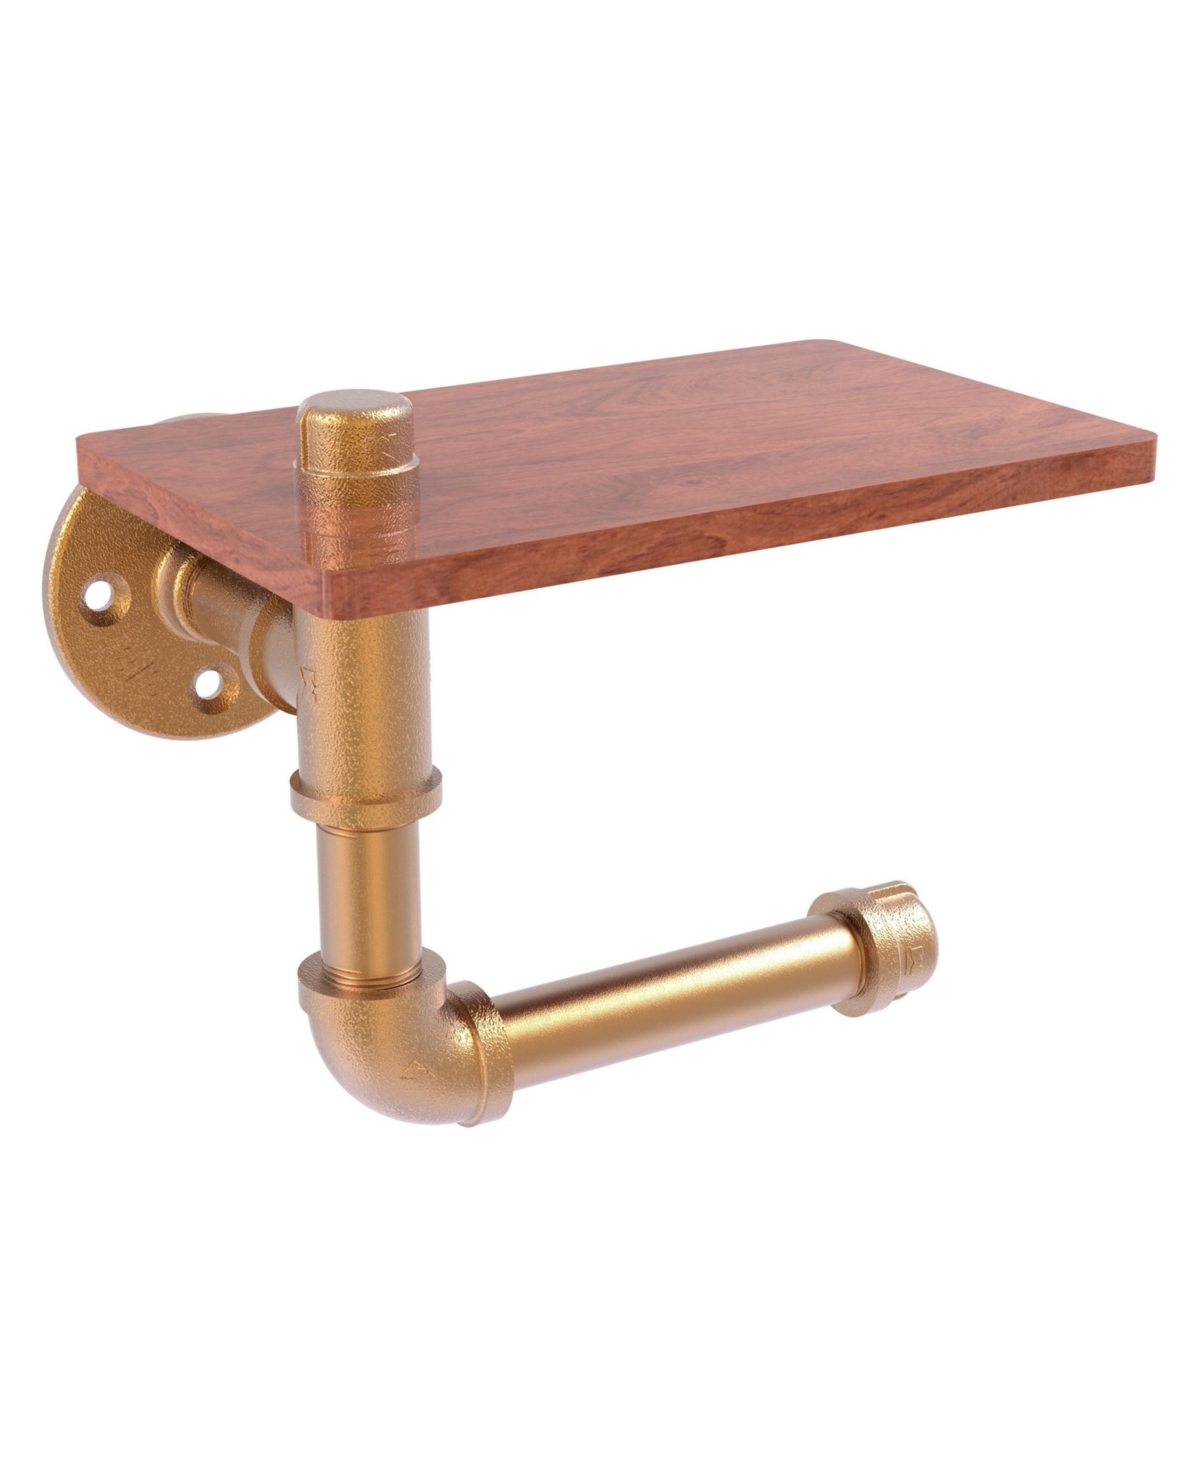 15901487 Pipeline Collection Toilet Paper Holder with Wood  sku 15901487